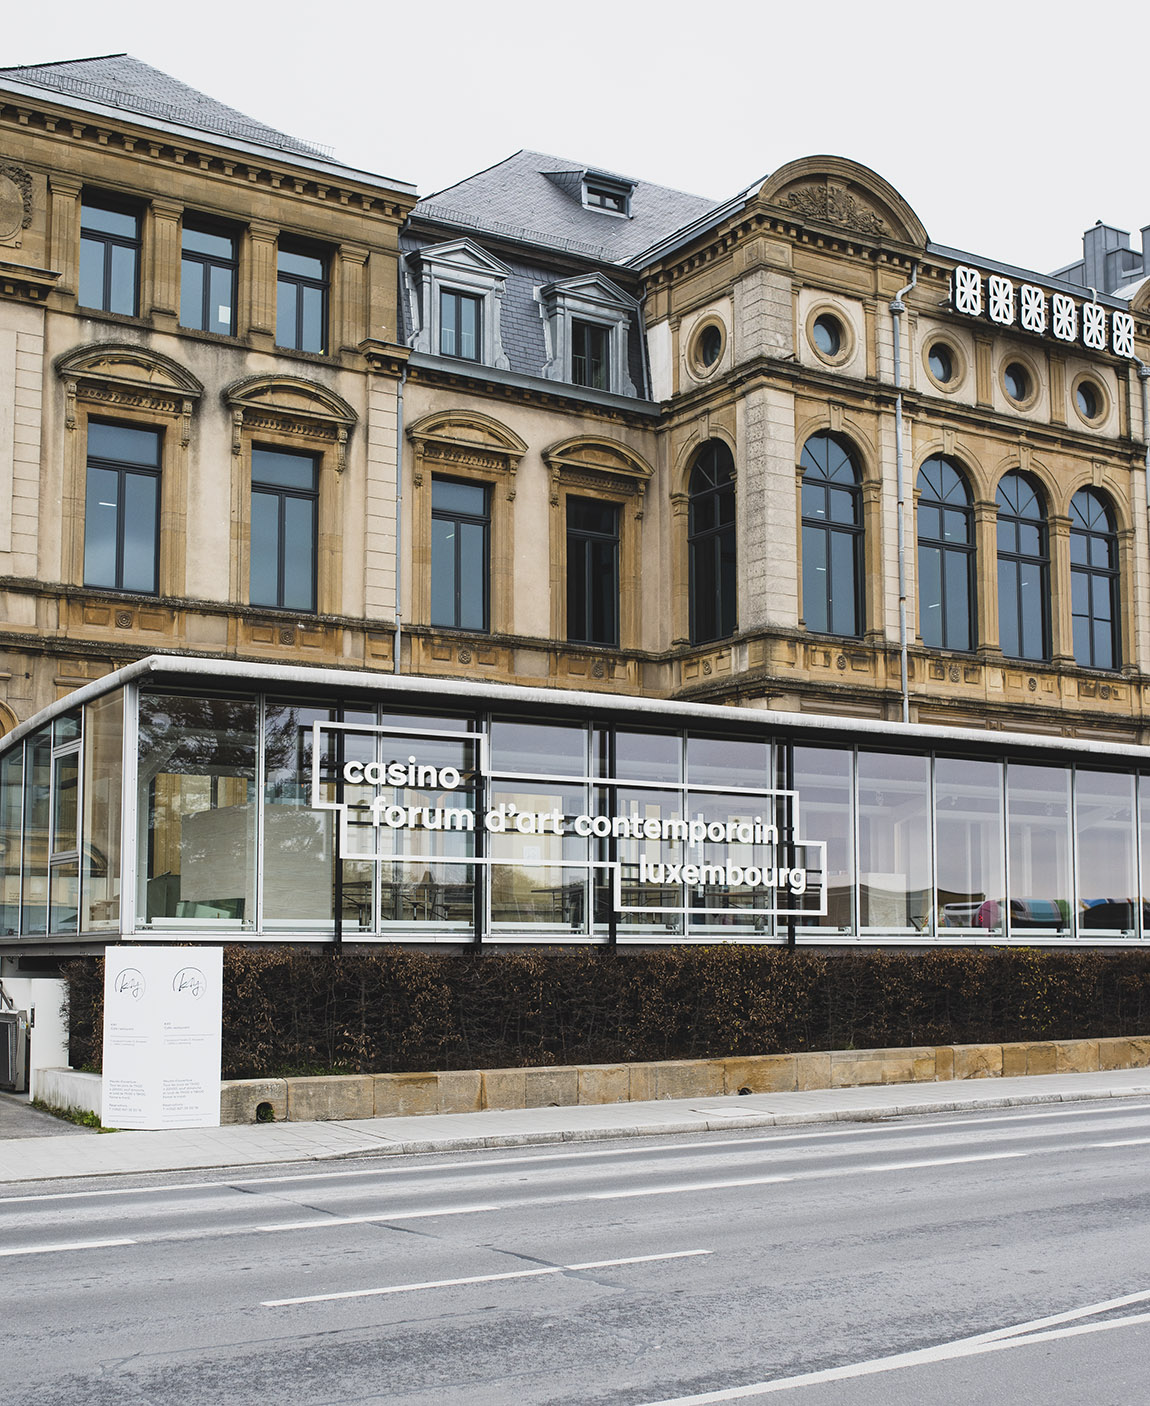 Museum-hopping in Luxembourg City